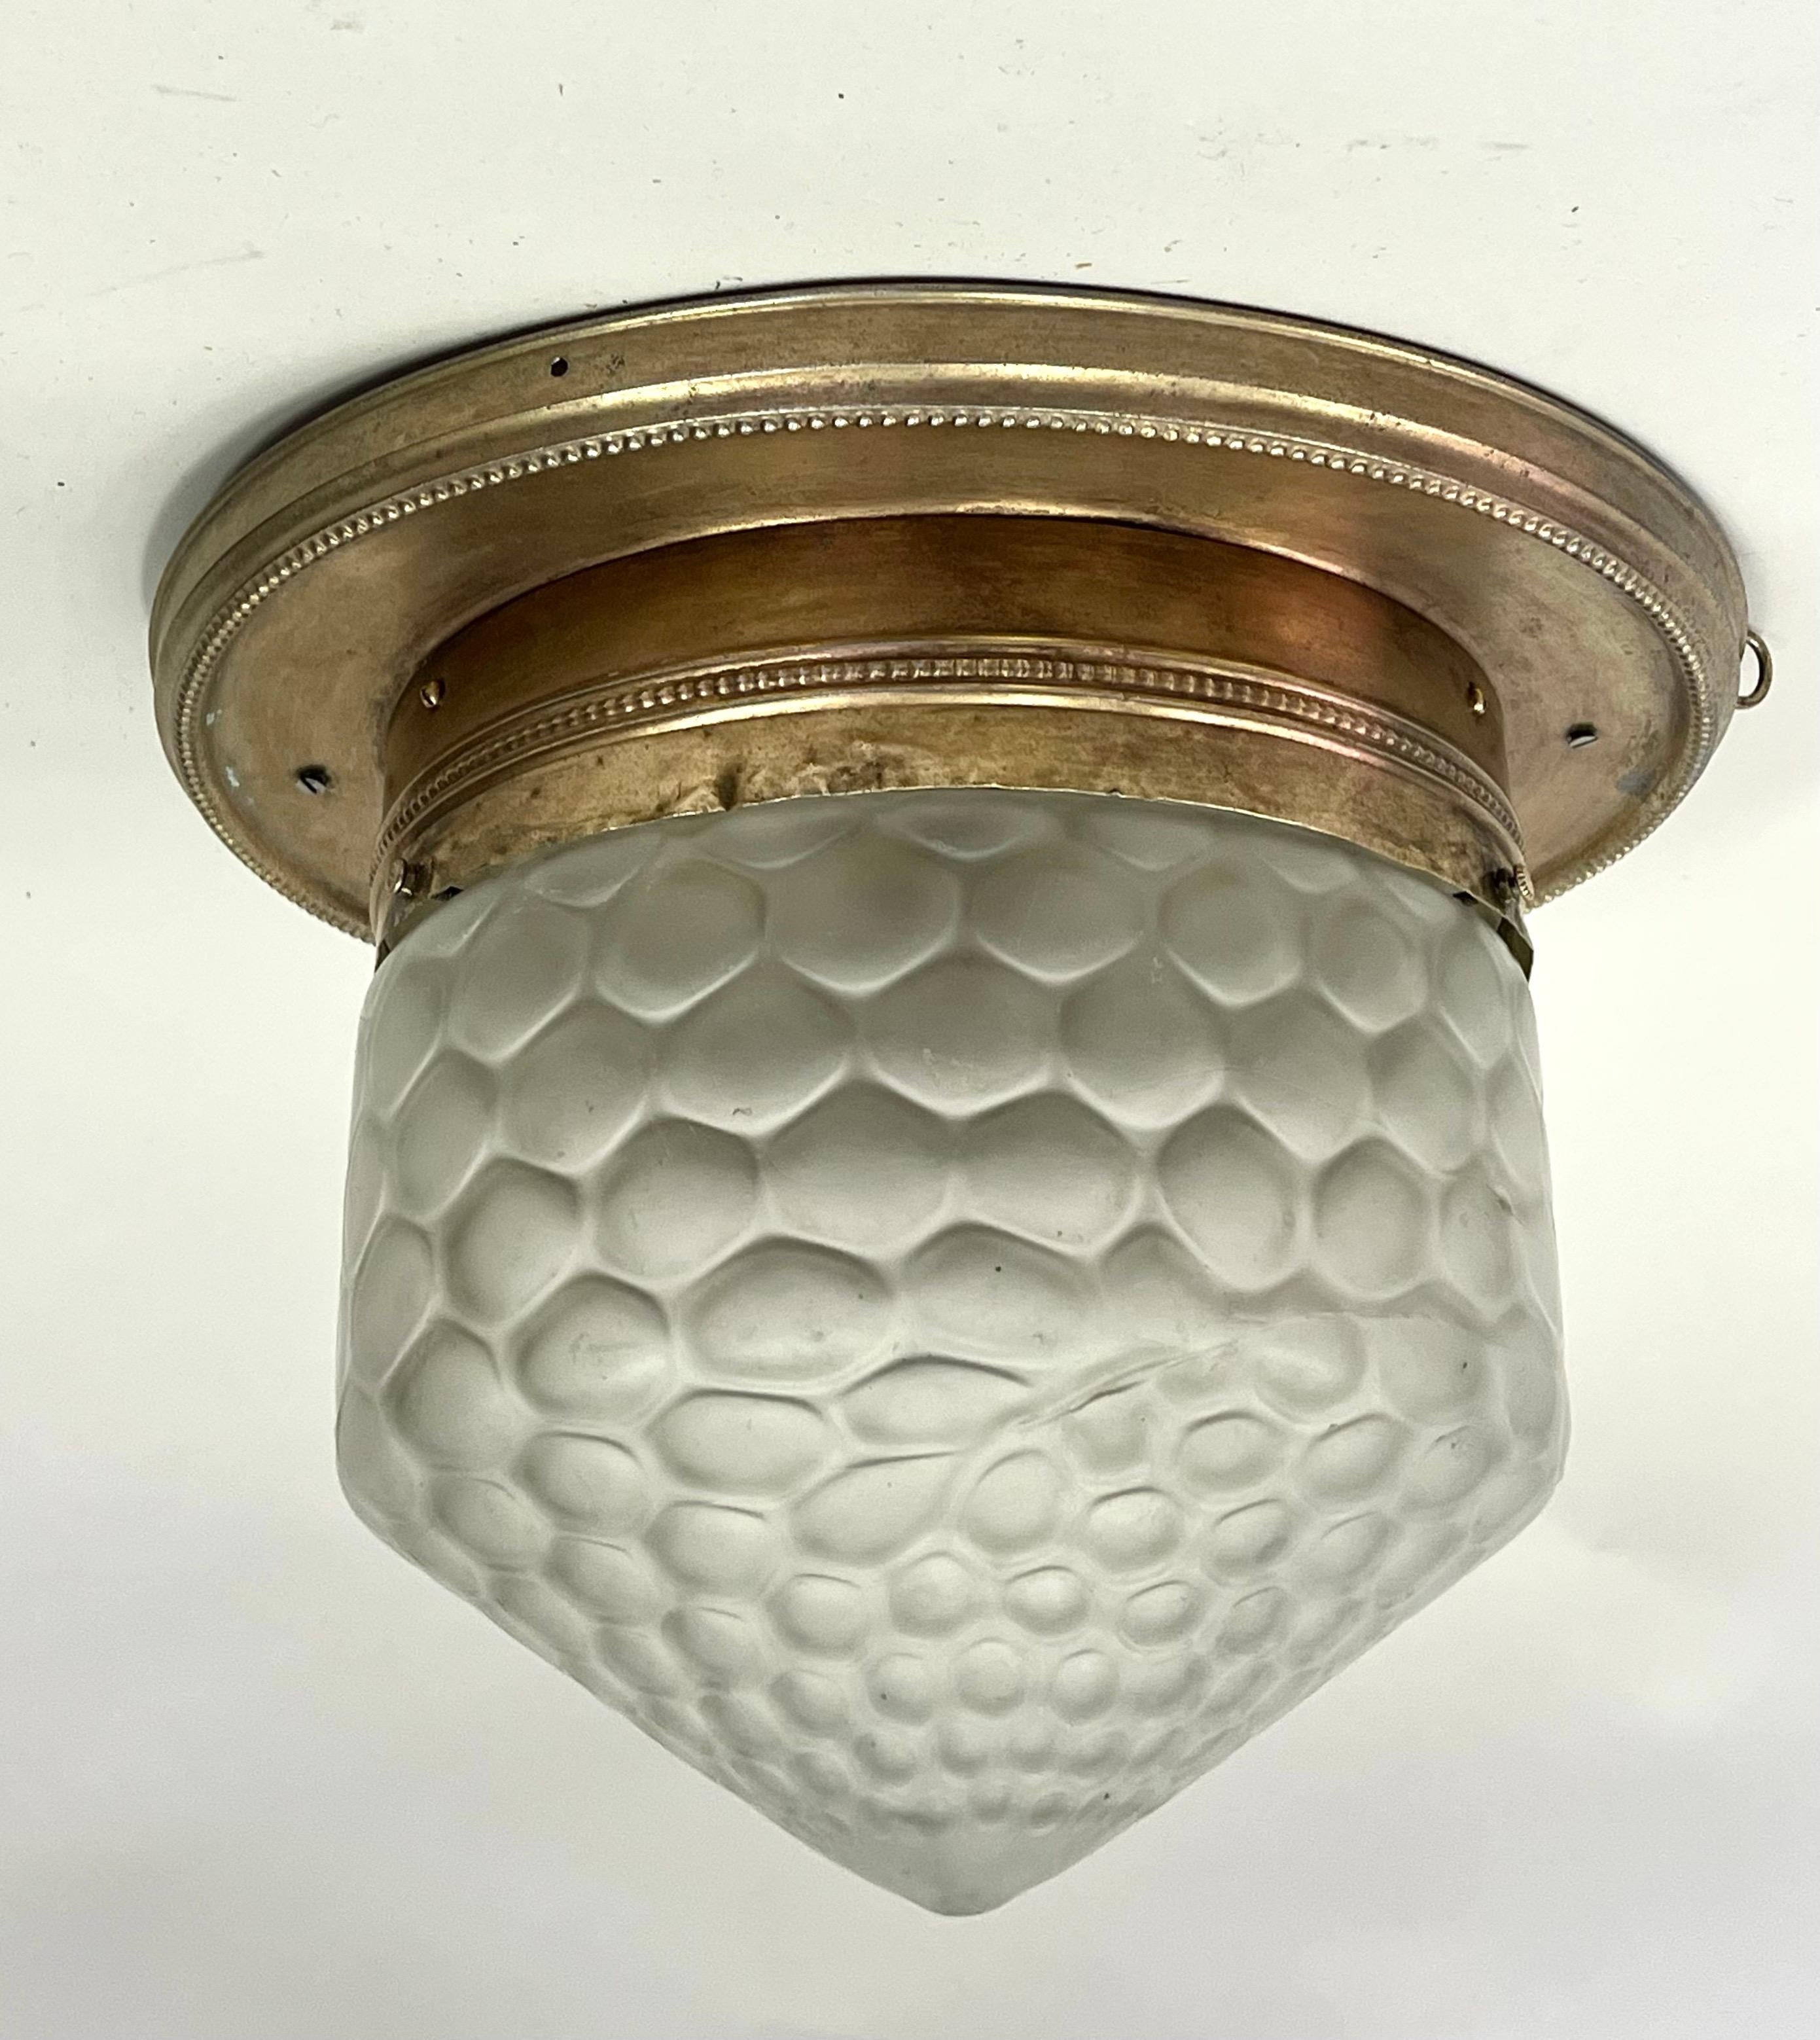 An Elegant and Classic French Art Deco / Early Mid-Century Modern Flush Mount fixture or pendant in the style of Emile-Jacques Ruhlmann. The brass is composed of an antique brass round frame featuring a minimal egg and dart motif. The satin glass